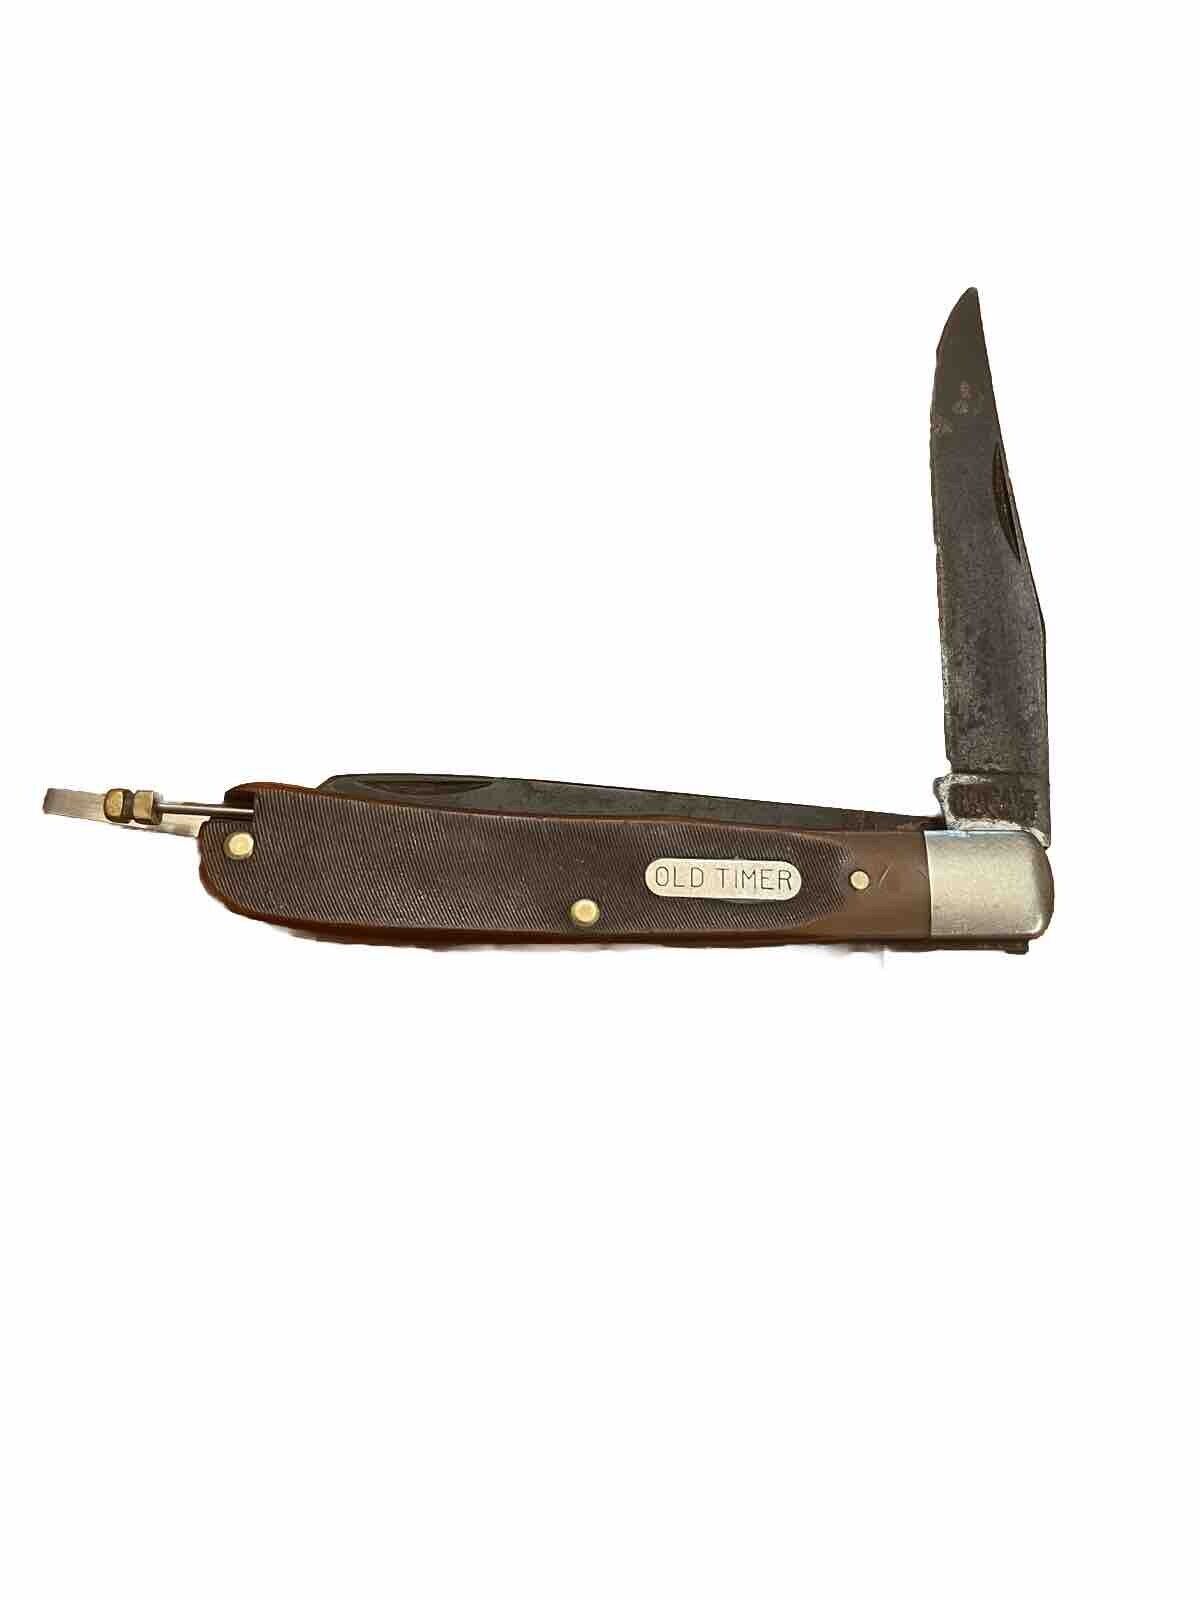 Vintage 96 OT Bearhead Trapper Pocket knife with tweezers and scribe